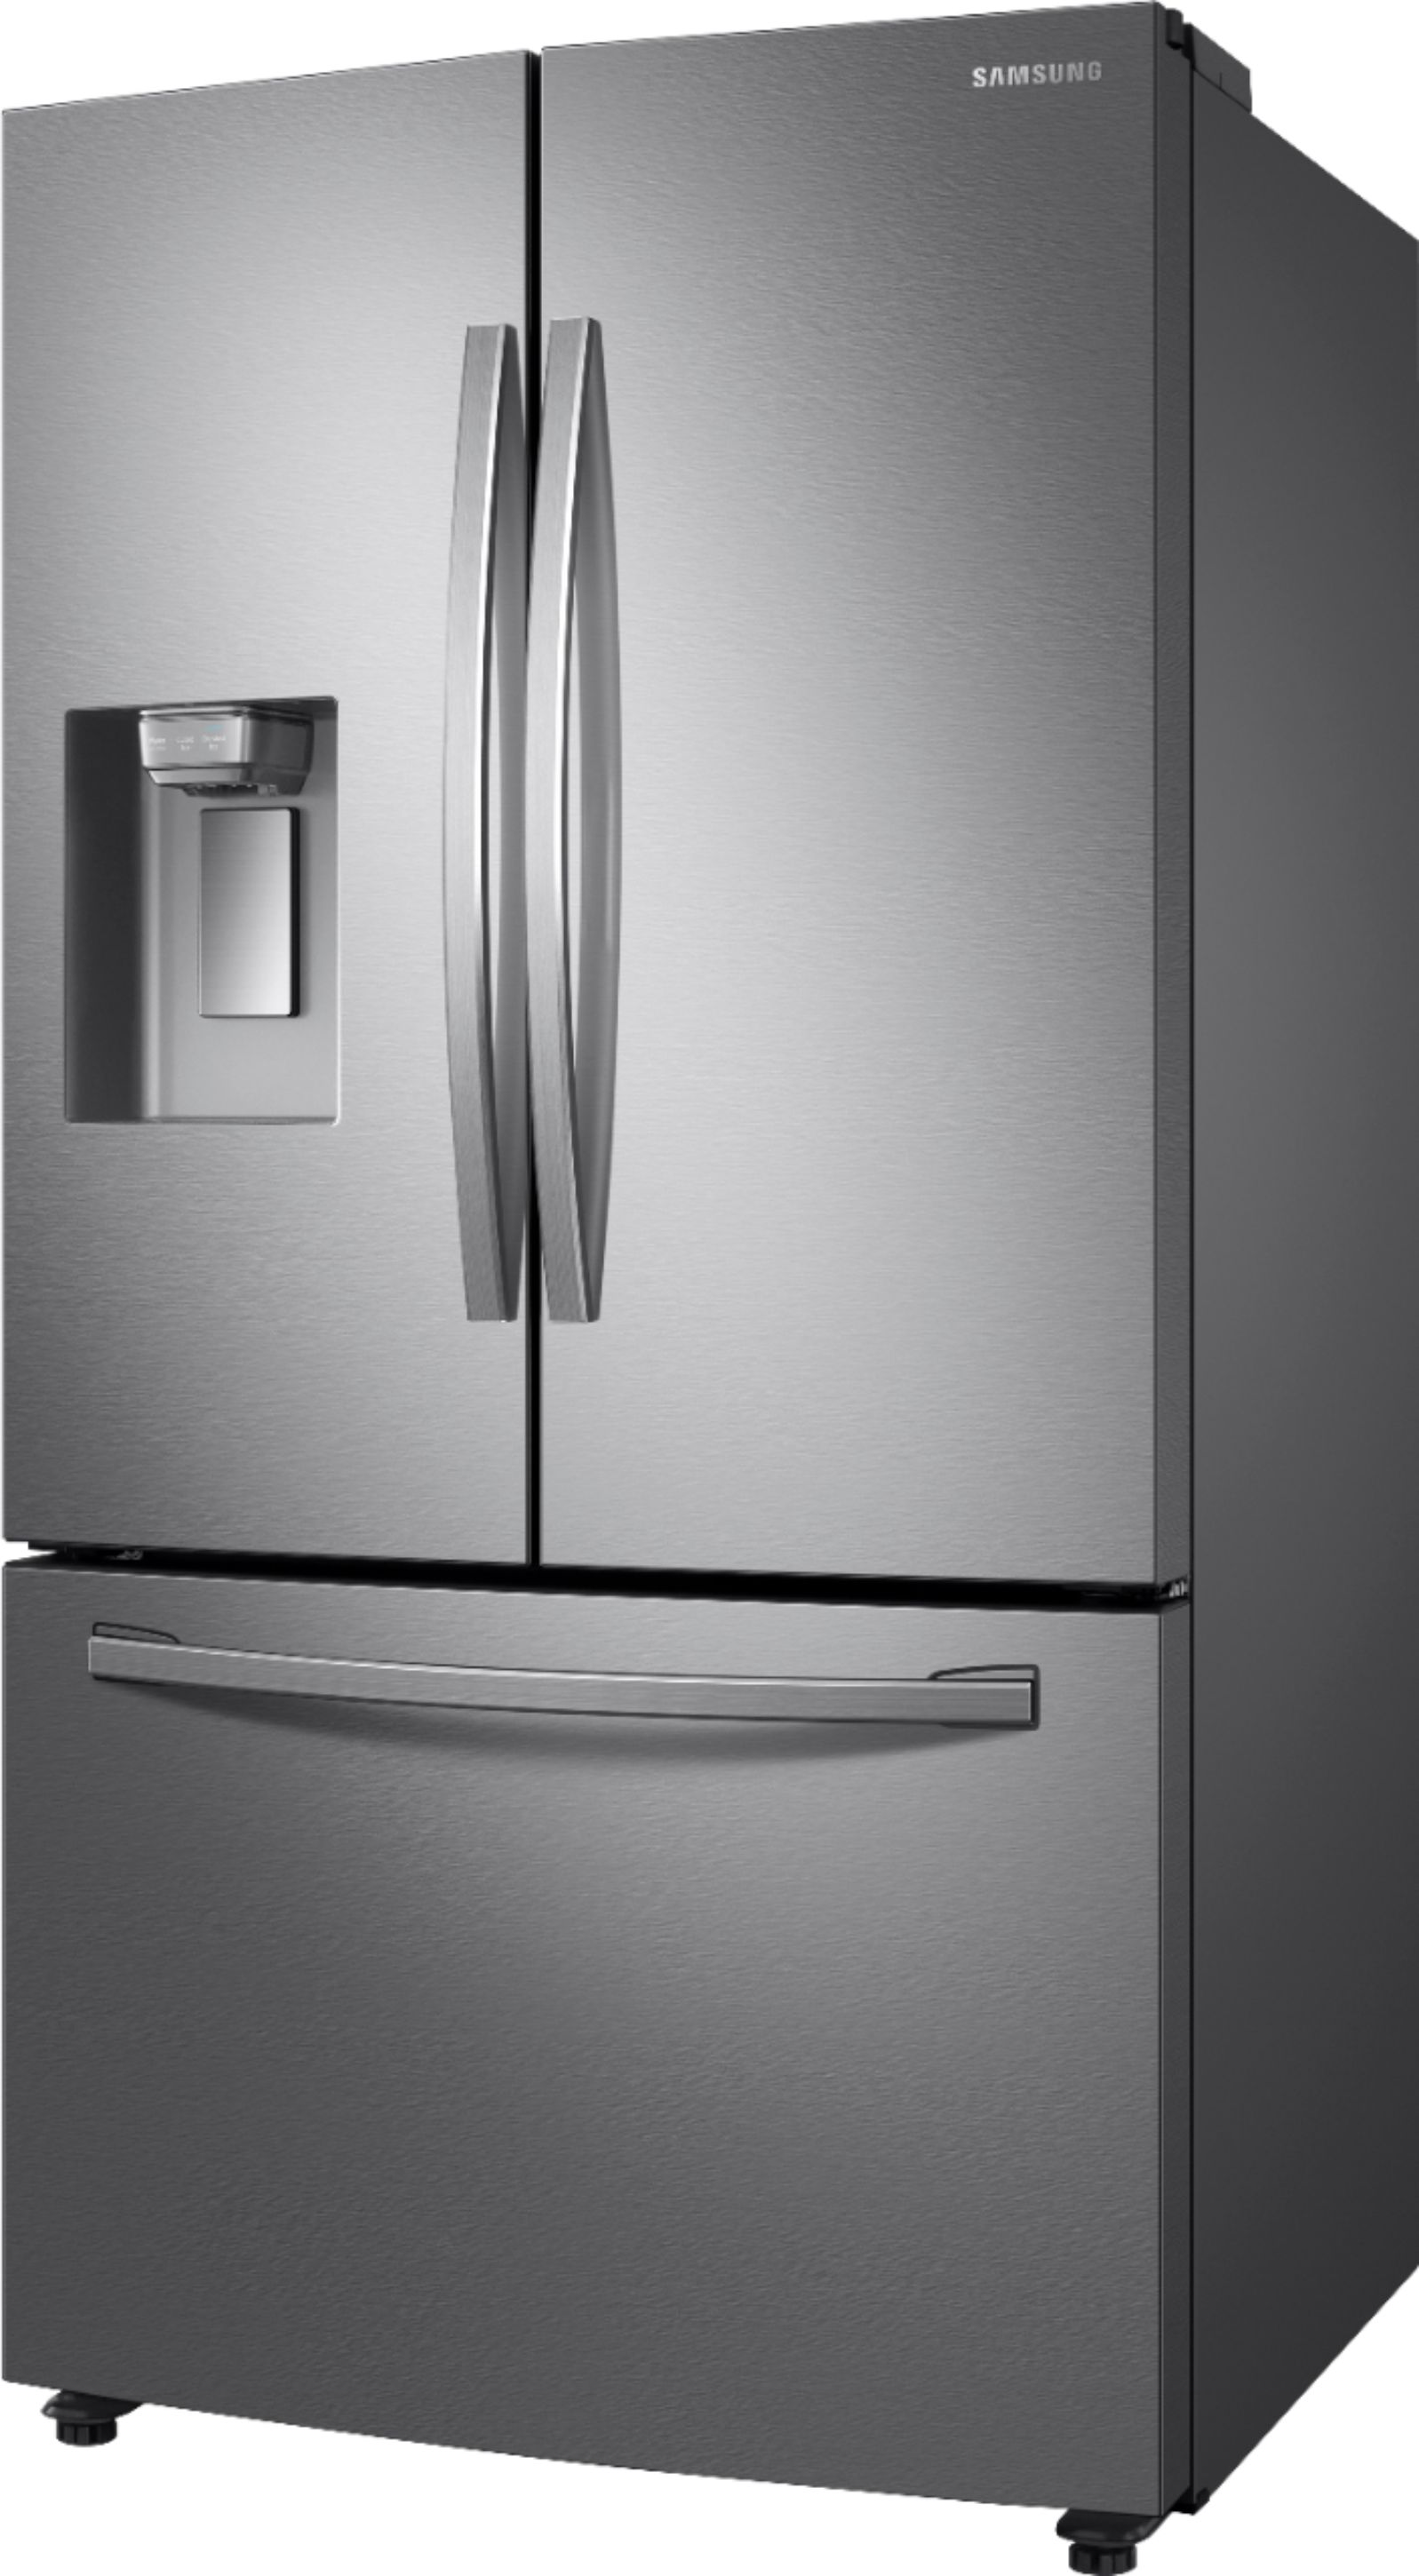 Left View: Sub-Zero - Classic 21 Cu. Ft. French Door Built-In Refrigerator with Internal Dispenser - Stainless steel